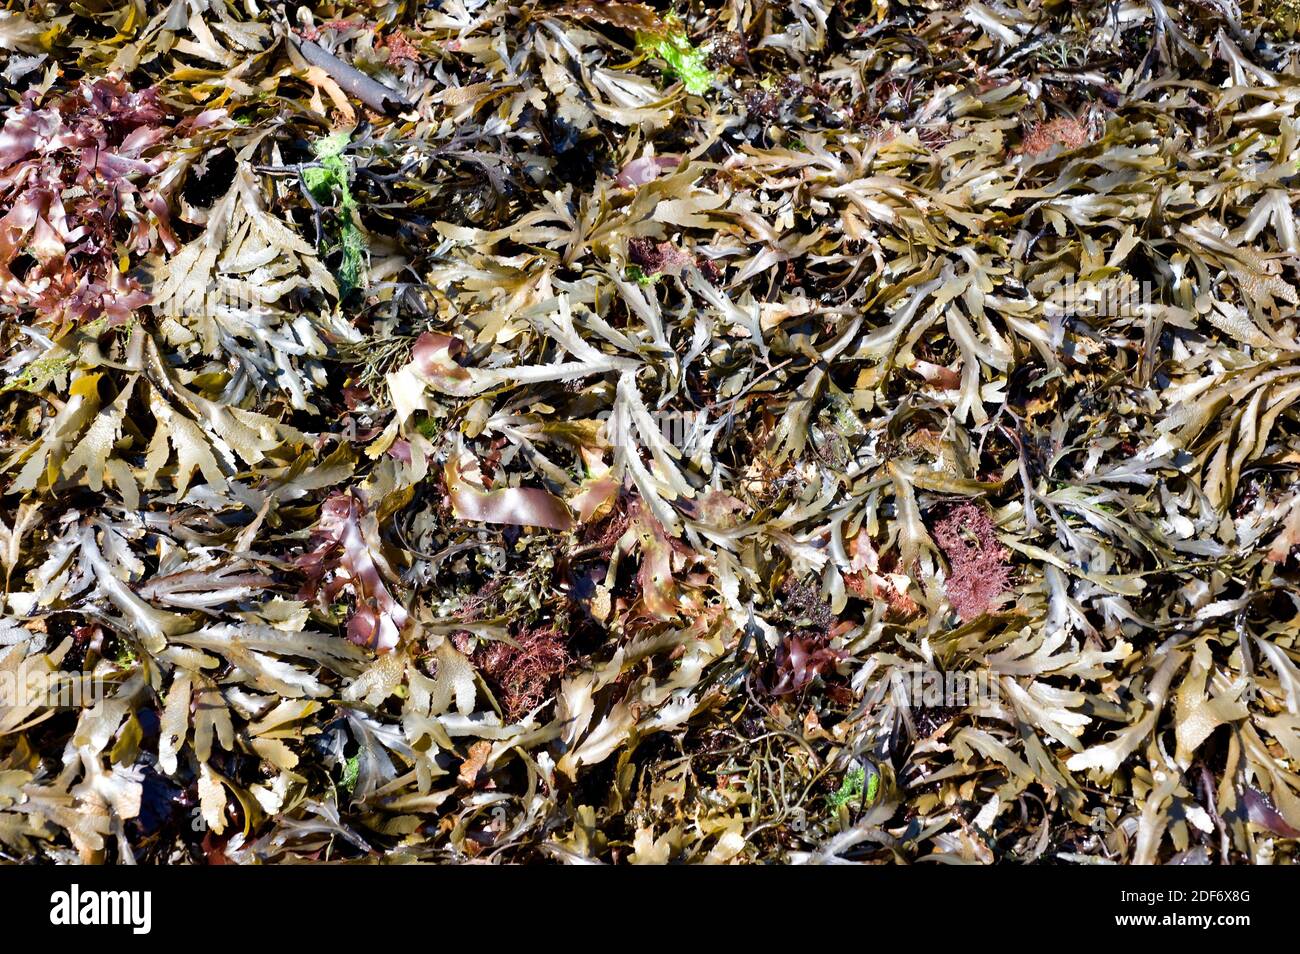 Serrated wrack (Fucus serratus) is a brown alga native to Atlantic Ocean. This photo was taken in Brittany coast, France. Stock Photo